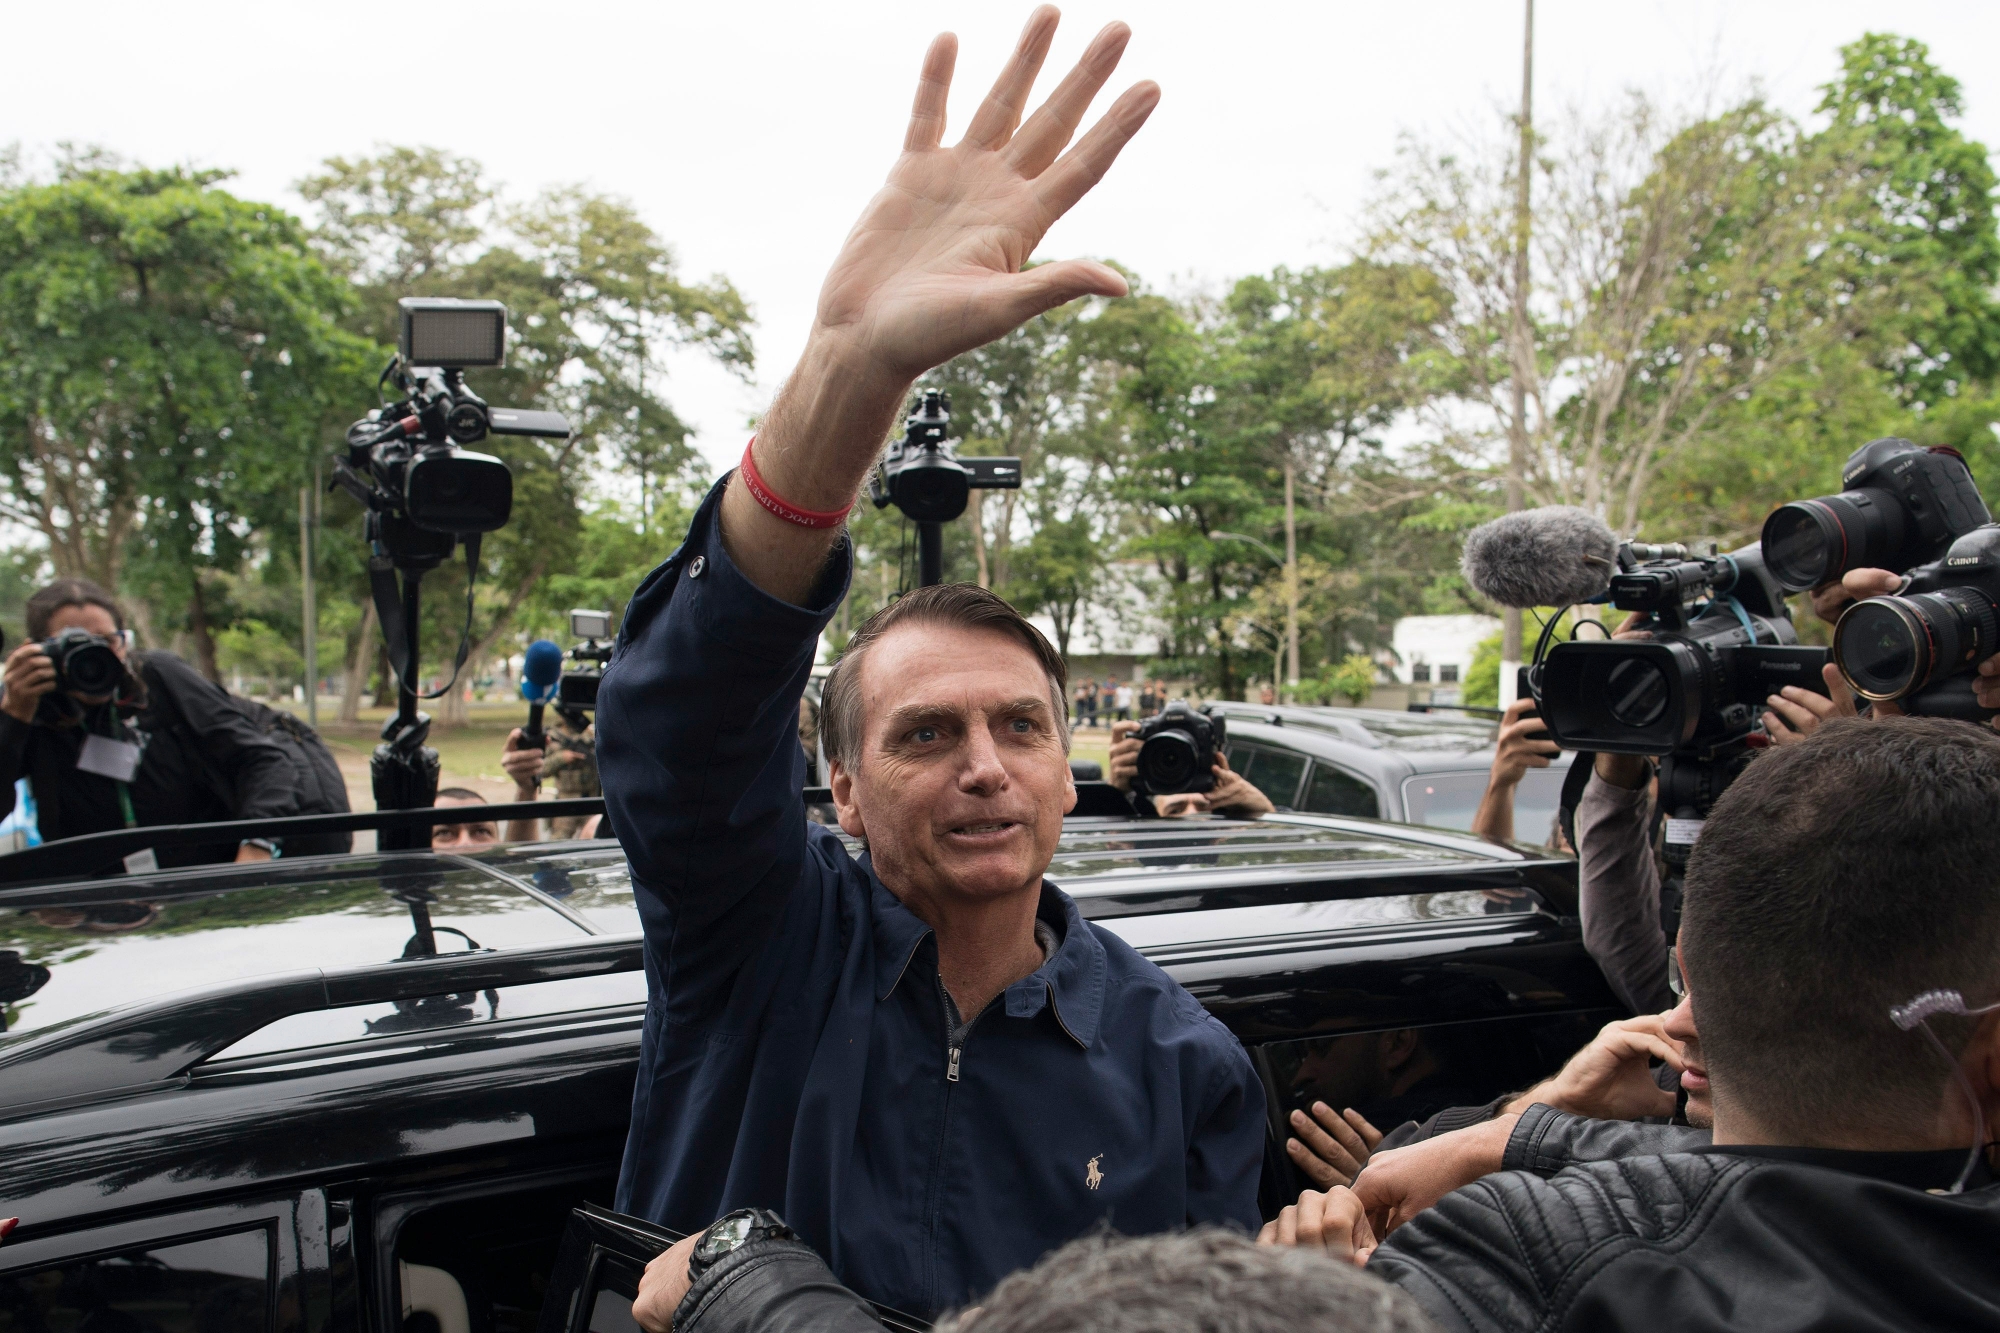 Presidential frontrunner Jair Bolsonaro, of the Social Liberal Party, waves to supporters after voting at a polling station in Rio de Janeiro, Brazil, Sunday, Oct. 7, 2018. Brazilians choose among 13 candidates for president Sunday in one of the most unpredictable and divisive elections in decades. If no one gets a majority in the first round, the top two candidates will compete in a runoff. (AP Photo/Leo Correa) Brazil Elections